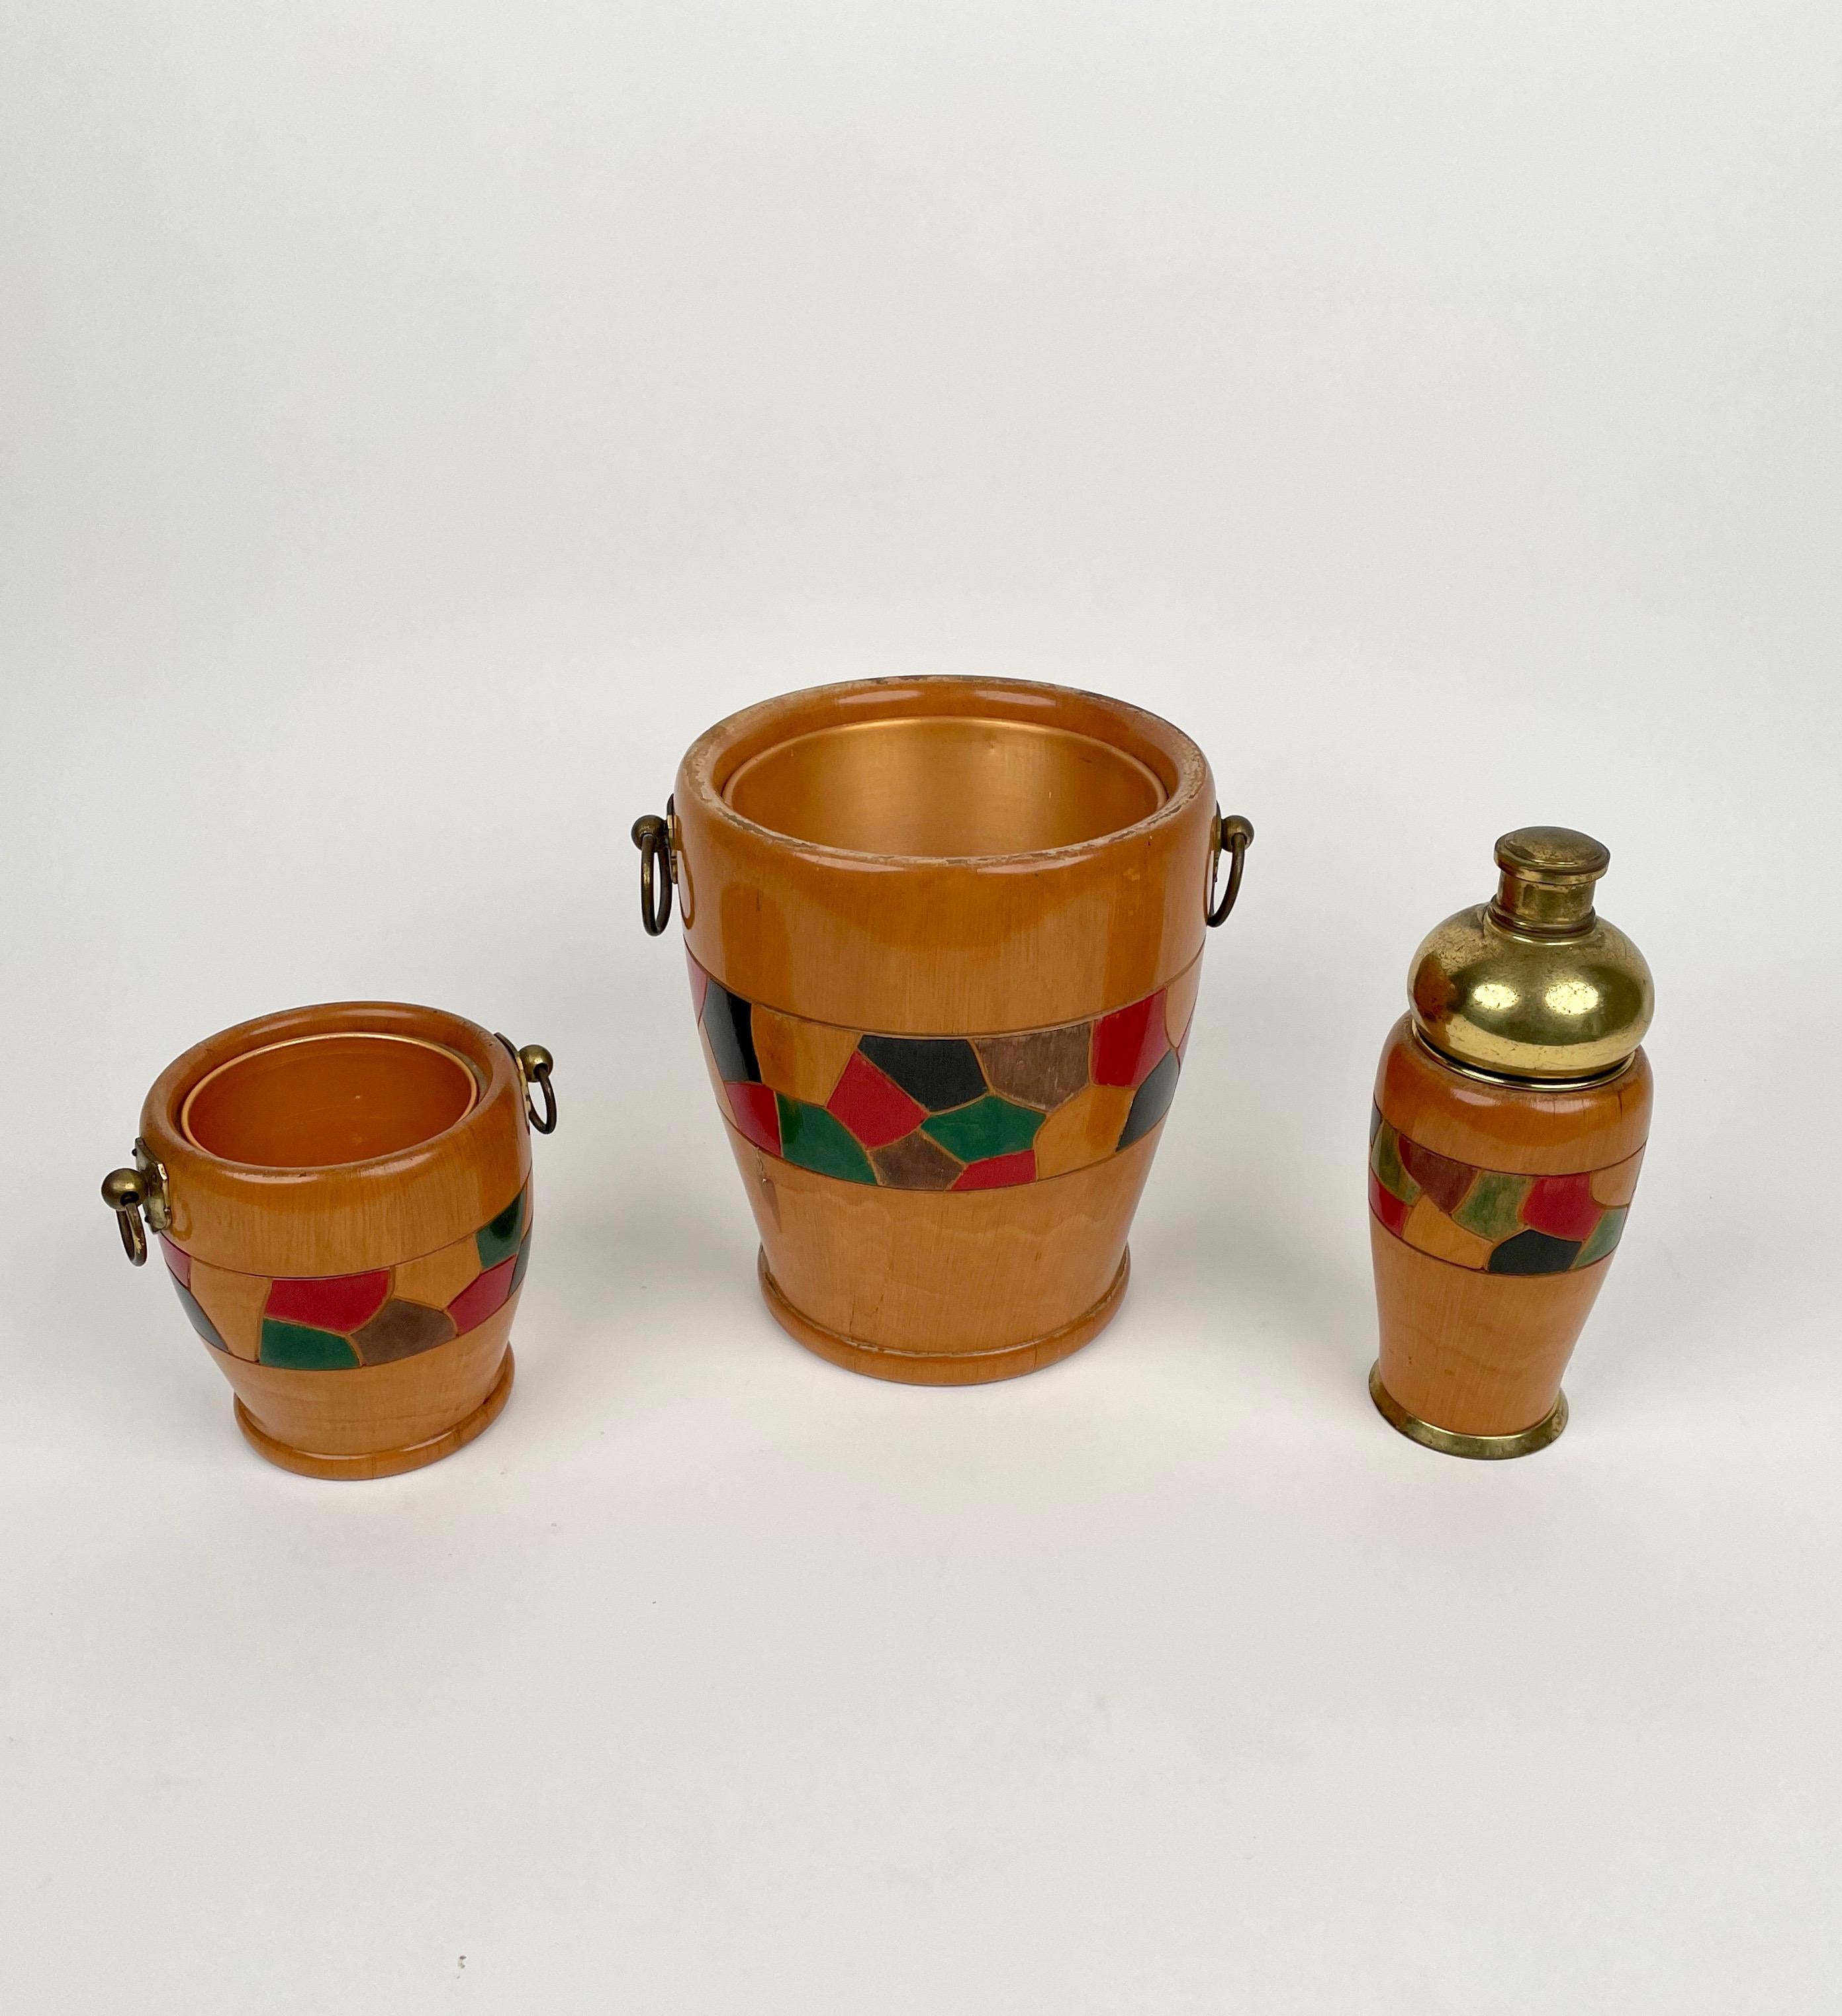 Barware set by Aldo Tura comprising of two ice buckets of different dimensional and a shake, all in hand-carved wood with brass details. Made in Italy in the 1950s. 

Dimensions:
- Big ice bucket: 21cm diameter, 24cm height 
- Small ice bucket: